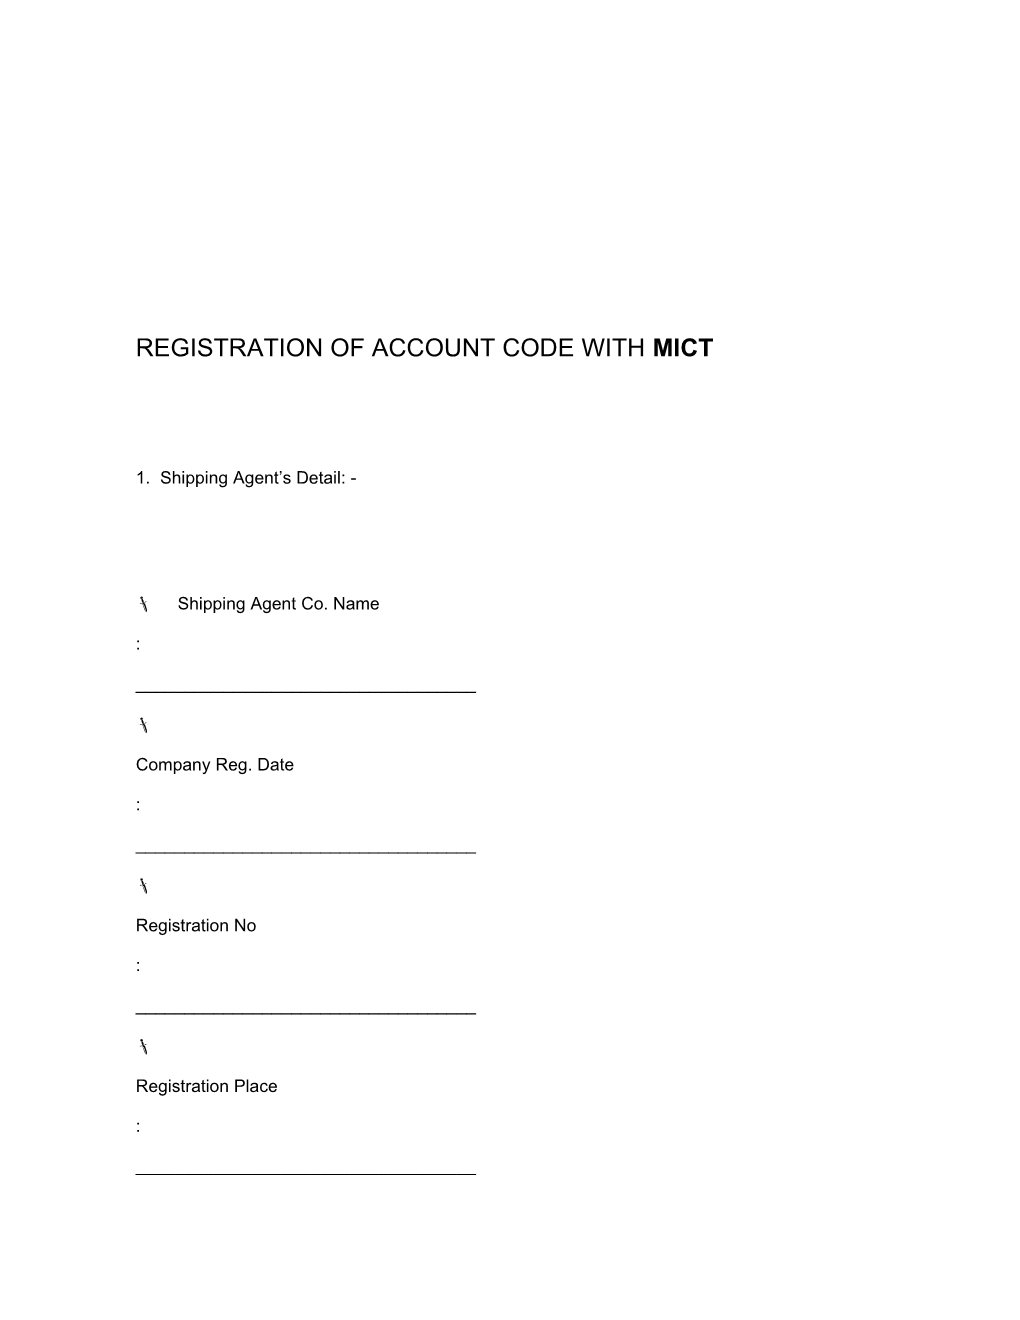 Registration of Account Code with Mict